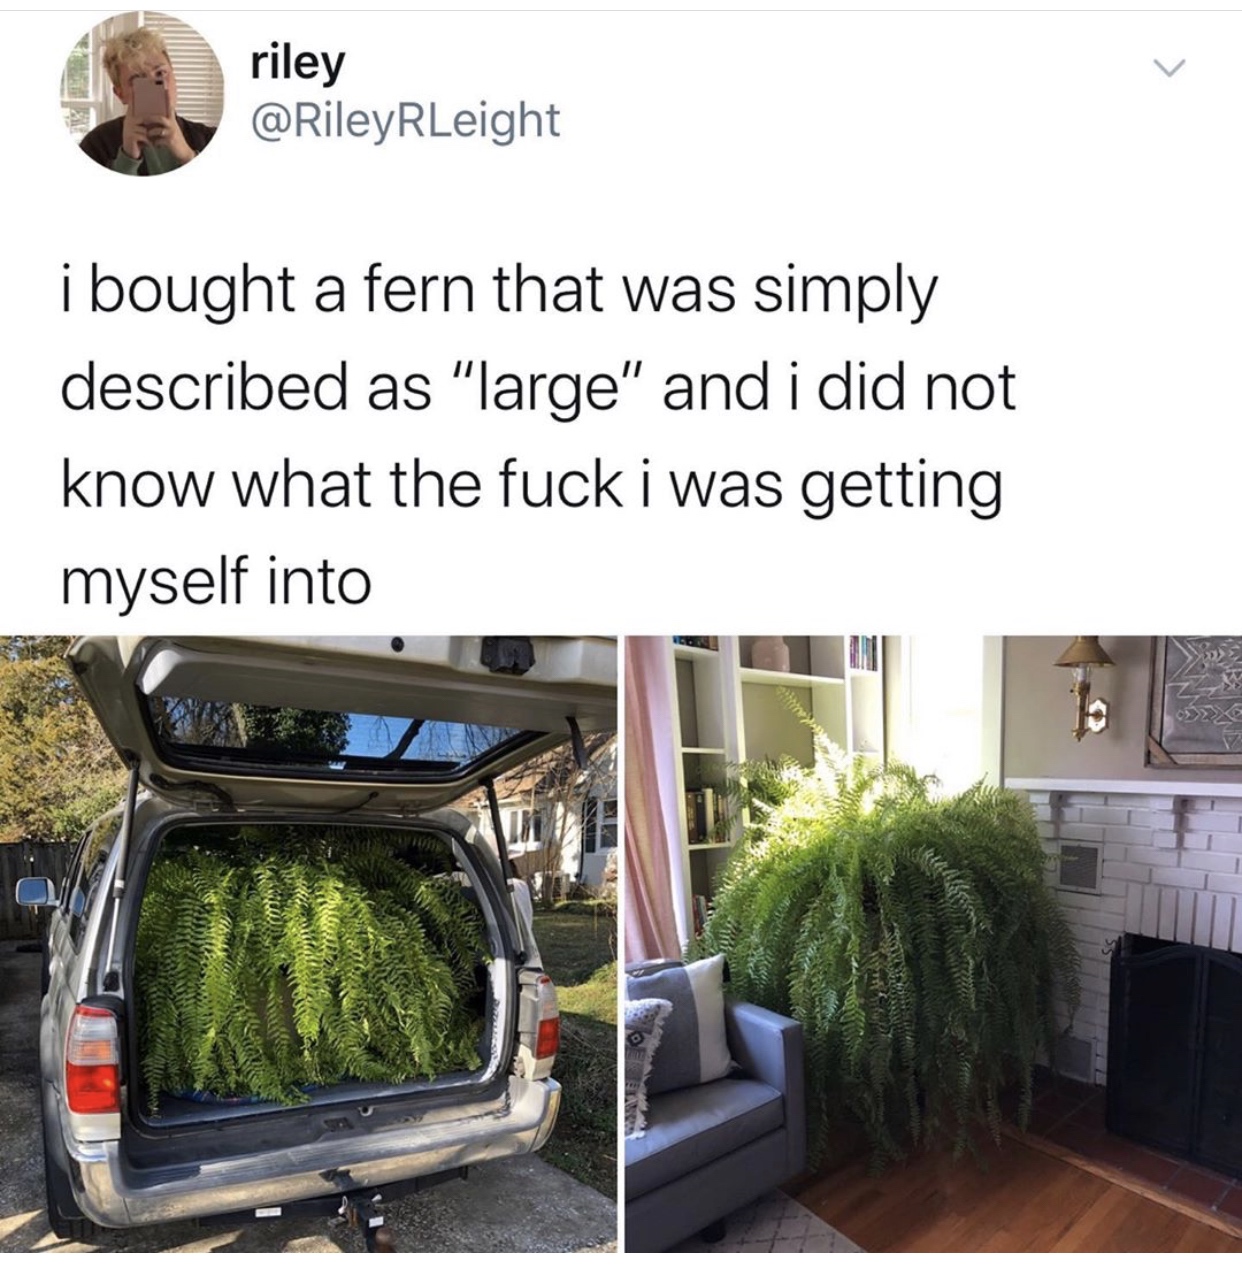 grass - riley i bought a fern that was simply described as "large" and i did not know what the fuck i was getting myself into